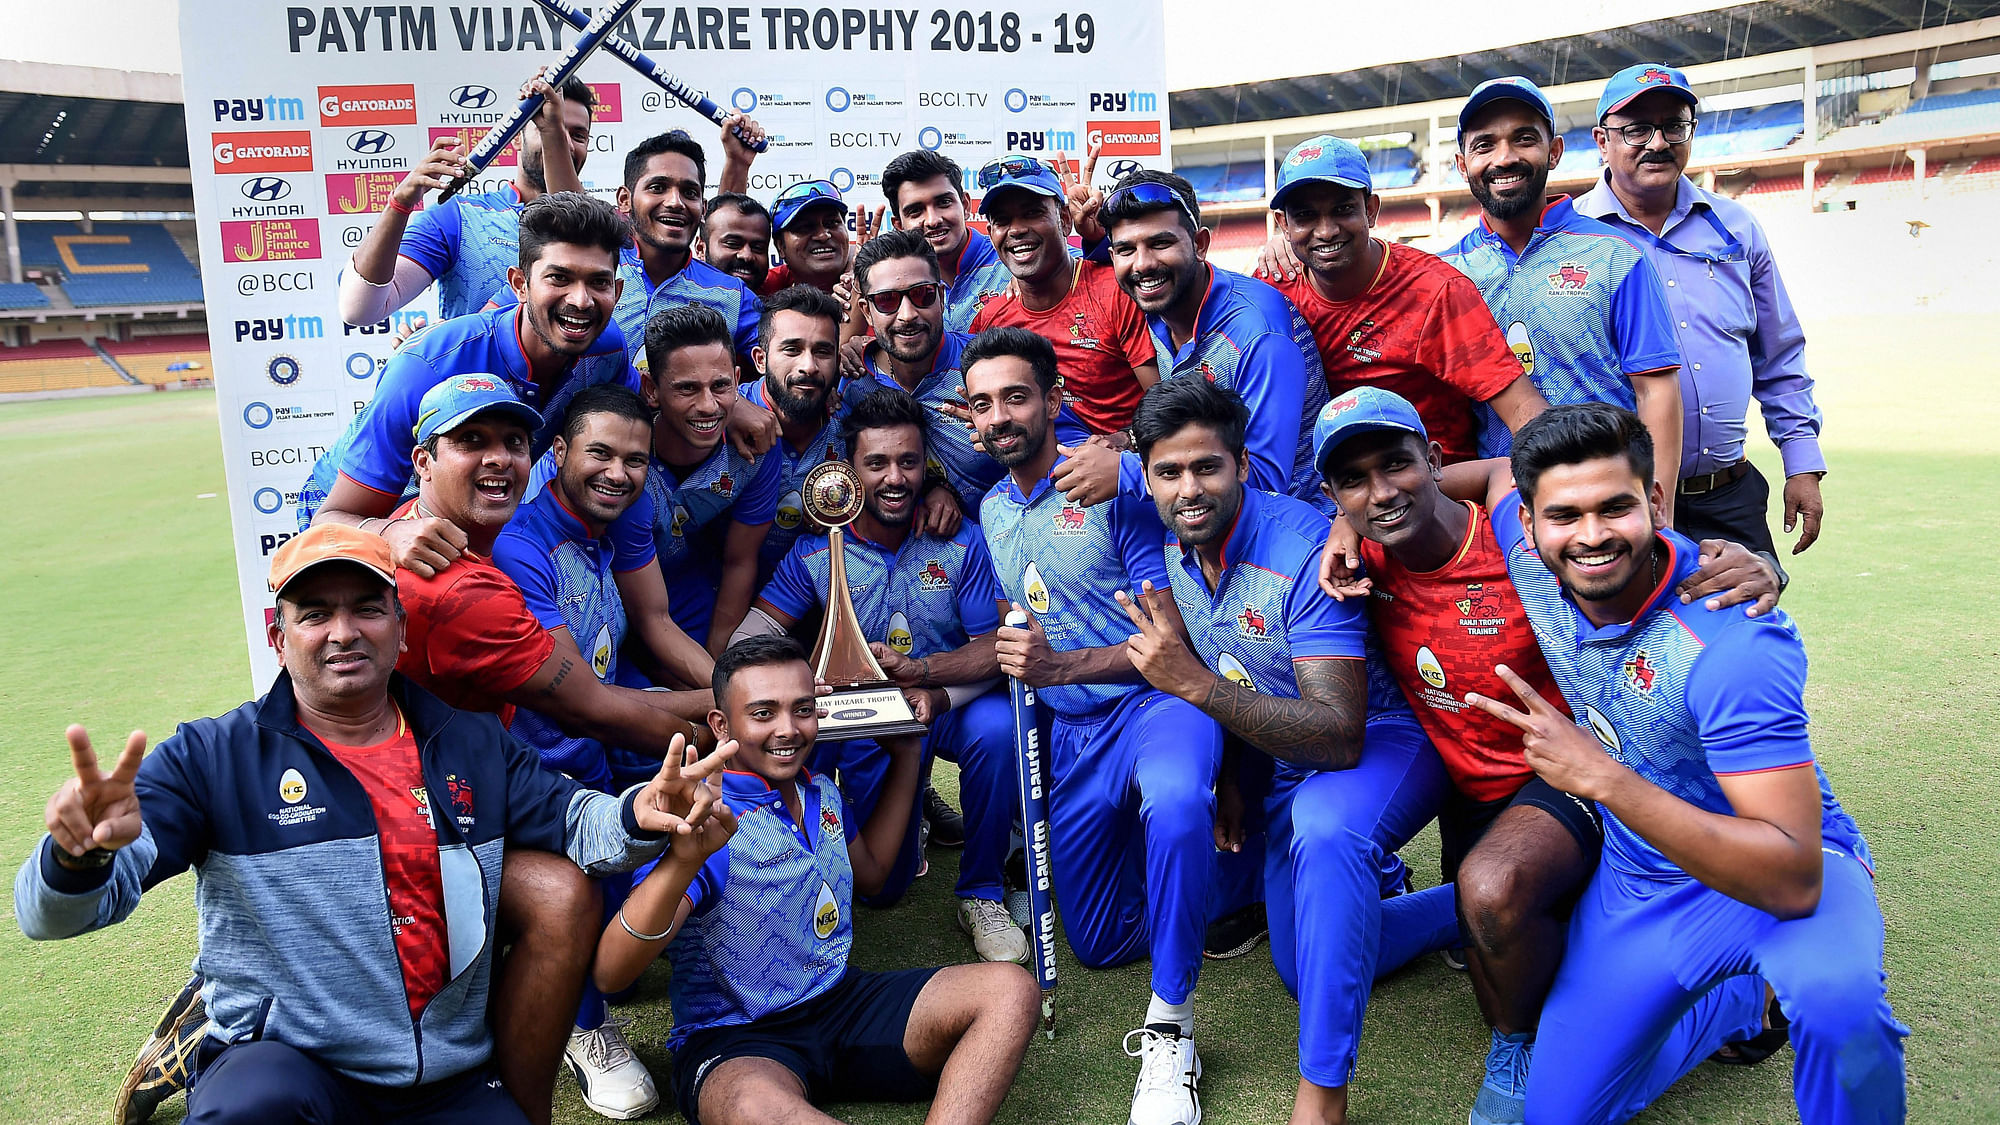 Mumbai went from tottering at 40-4 to defeating Delhi by 4 wickets to bag their third Vijay Hazare Trophy title.